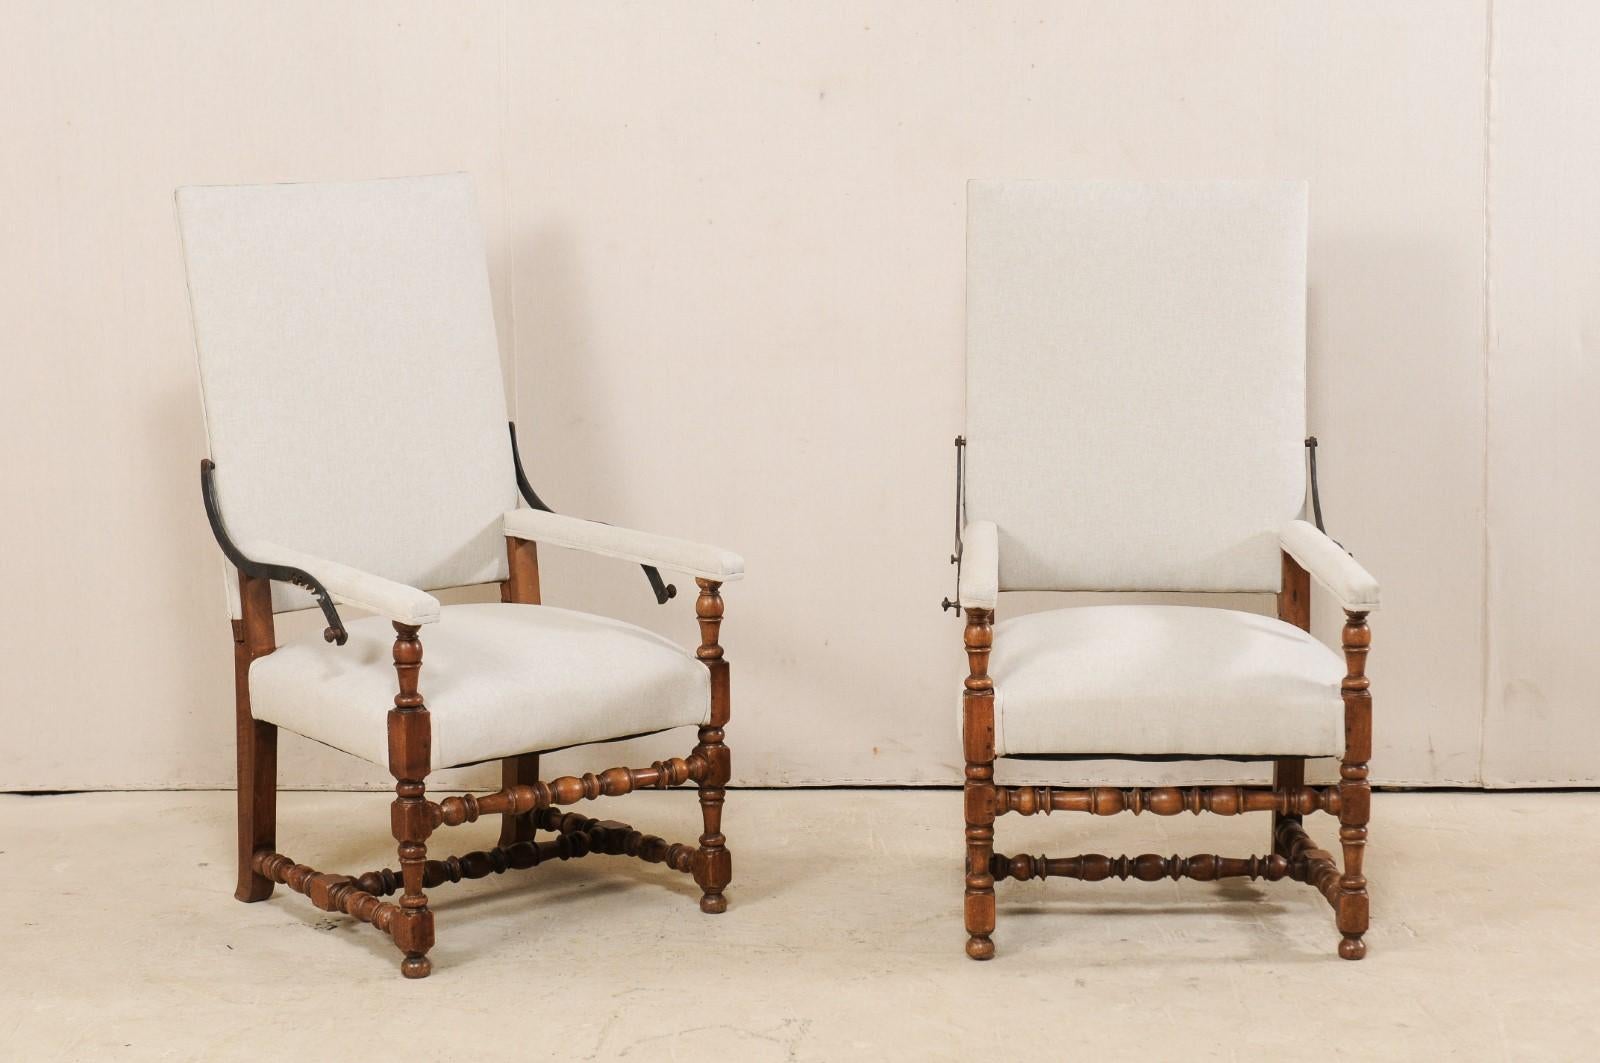 A pair of Italian reclining carved wood and upholstered armchairs from the 19th century. These unique antique chairs from Italy, designed in Louis XIII style, feature cleanly designed backs with flat top rails and straight arms. The